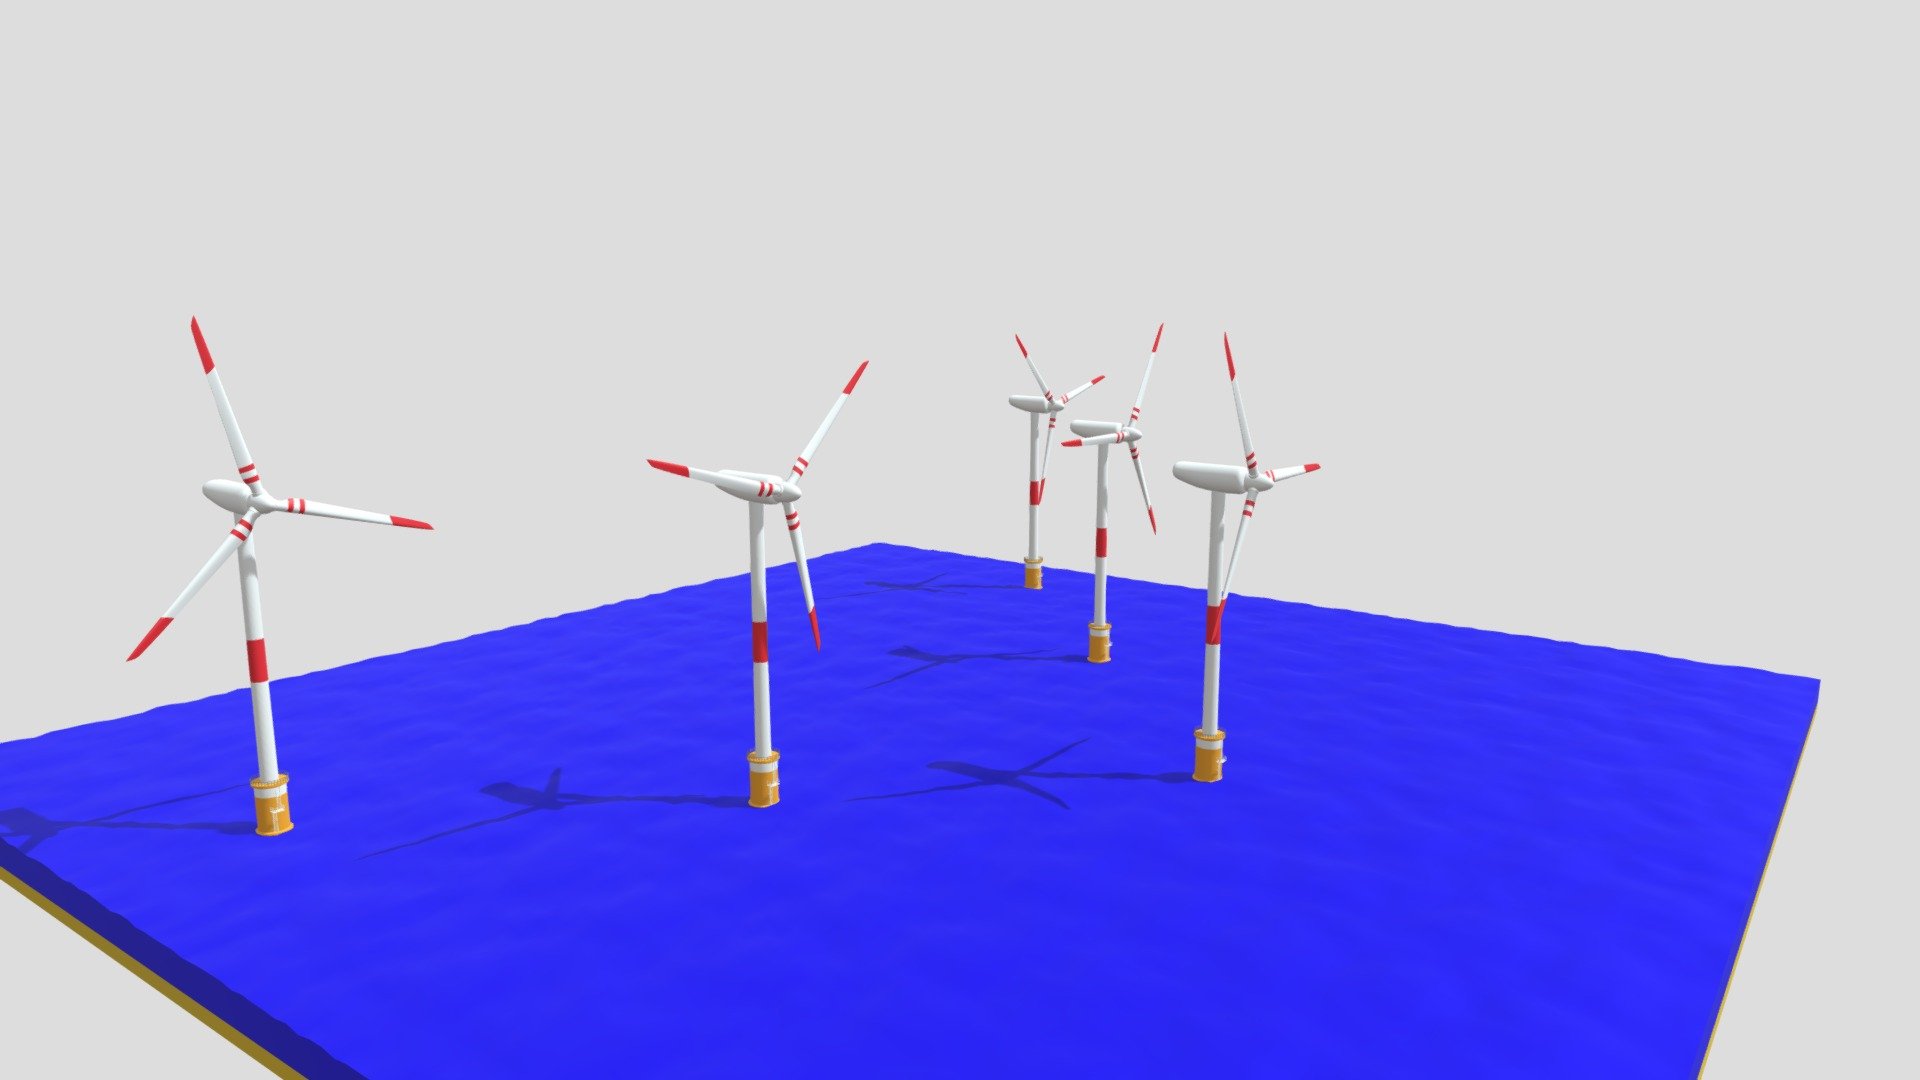 Offshore Wind Turbine.

Made with Blender 2.8.

Rendered with Cycles.

system units -: m.

Polygons: 8,235.

Vertices: 8,993.

Formats: . blend . fbx . obj, c4d,dae,fbx,unity.

Thank you 3d model